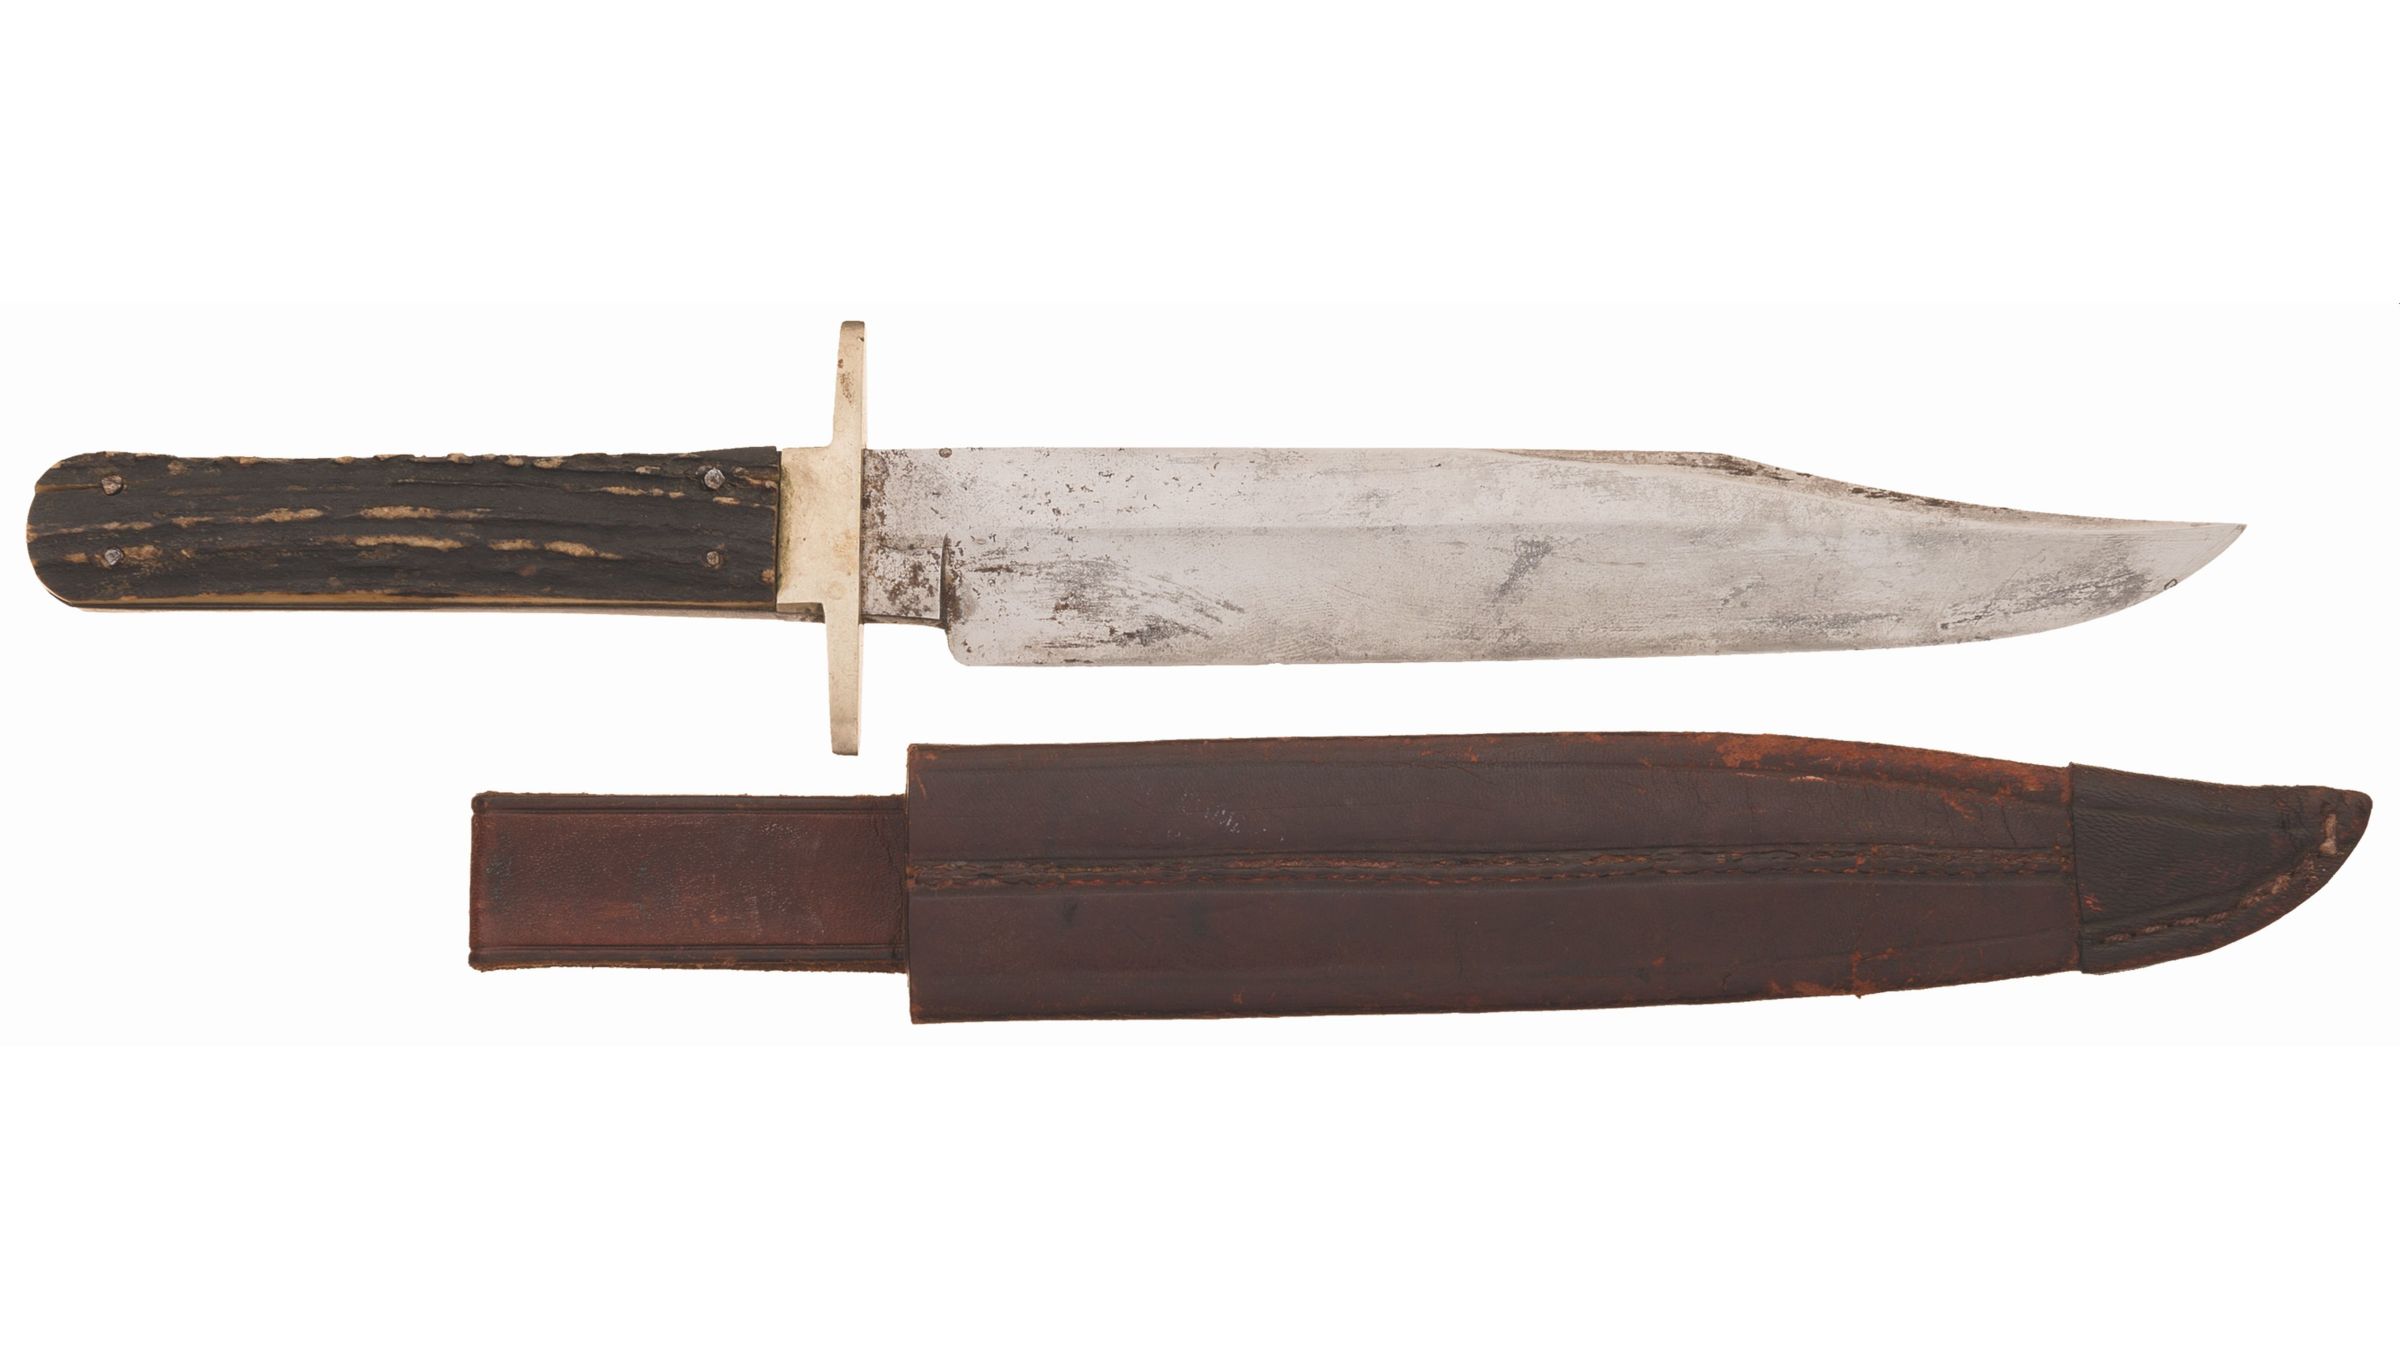 Antique Mexican Fighting Bowie Knife